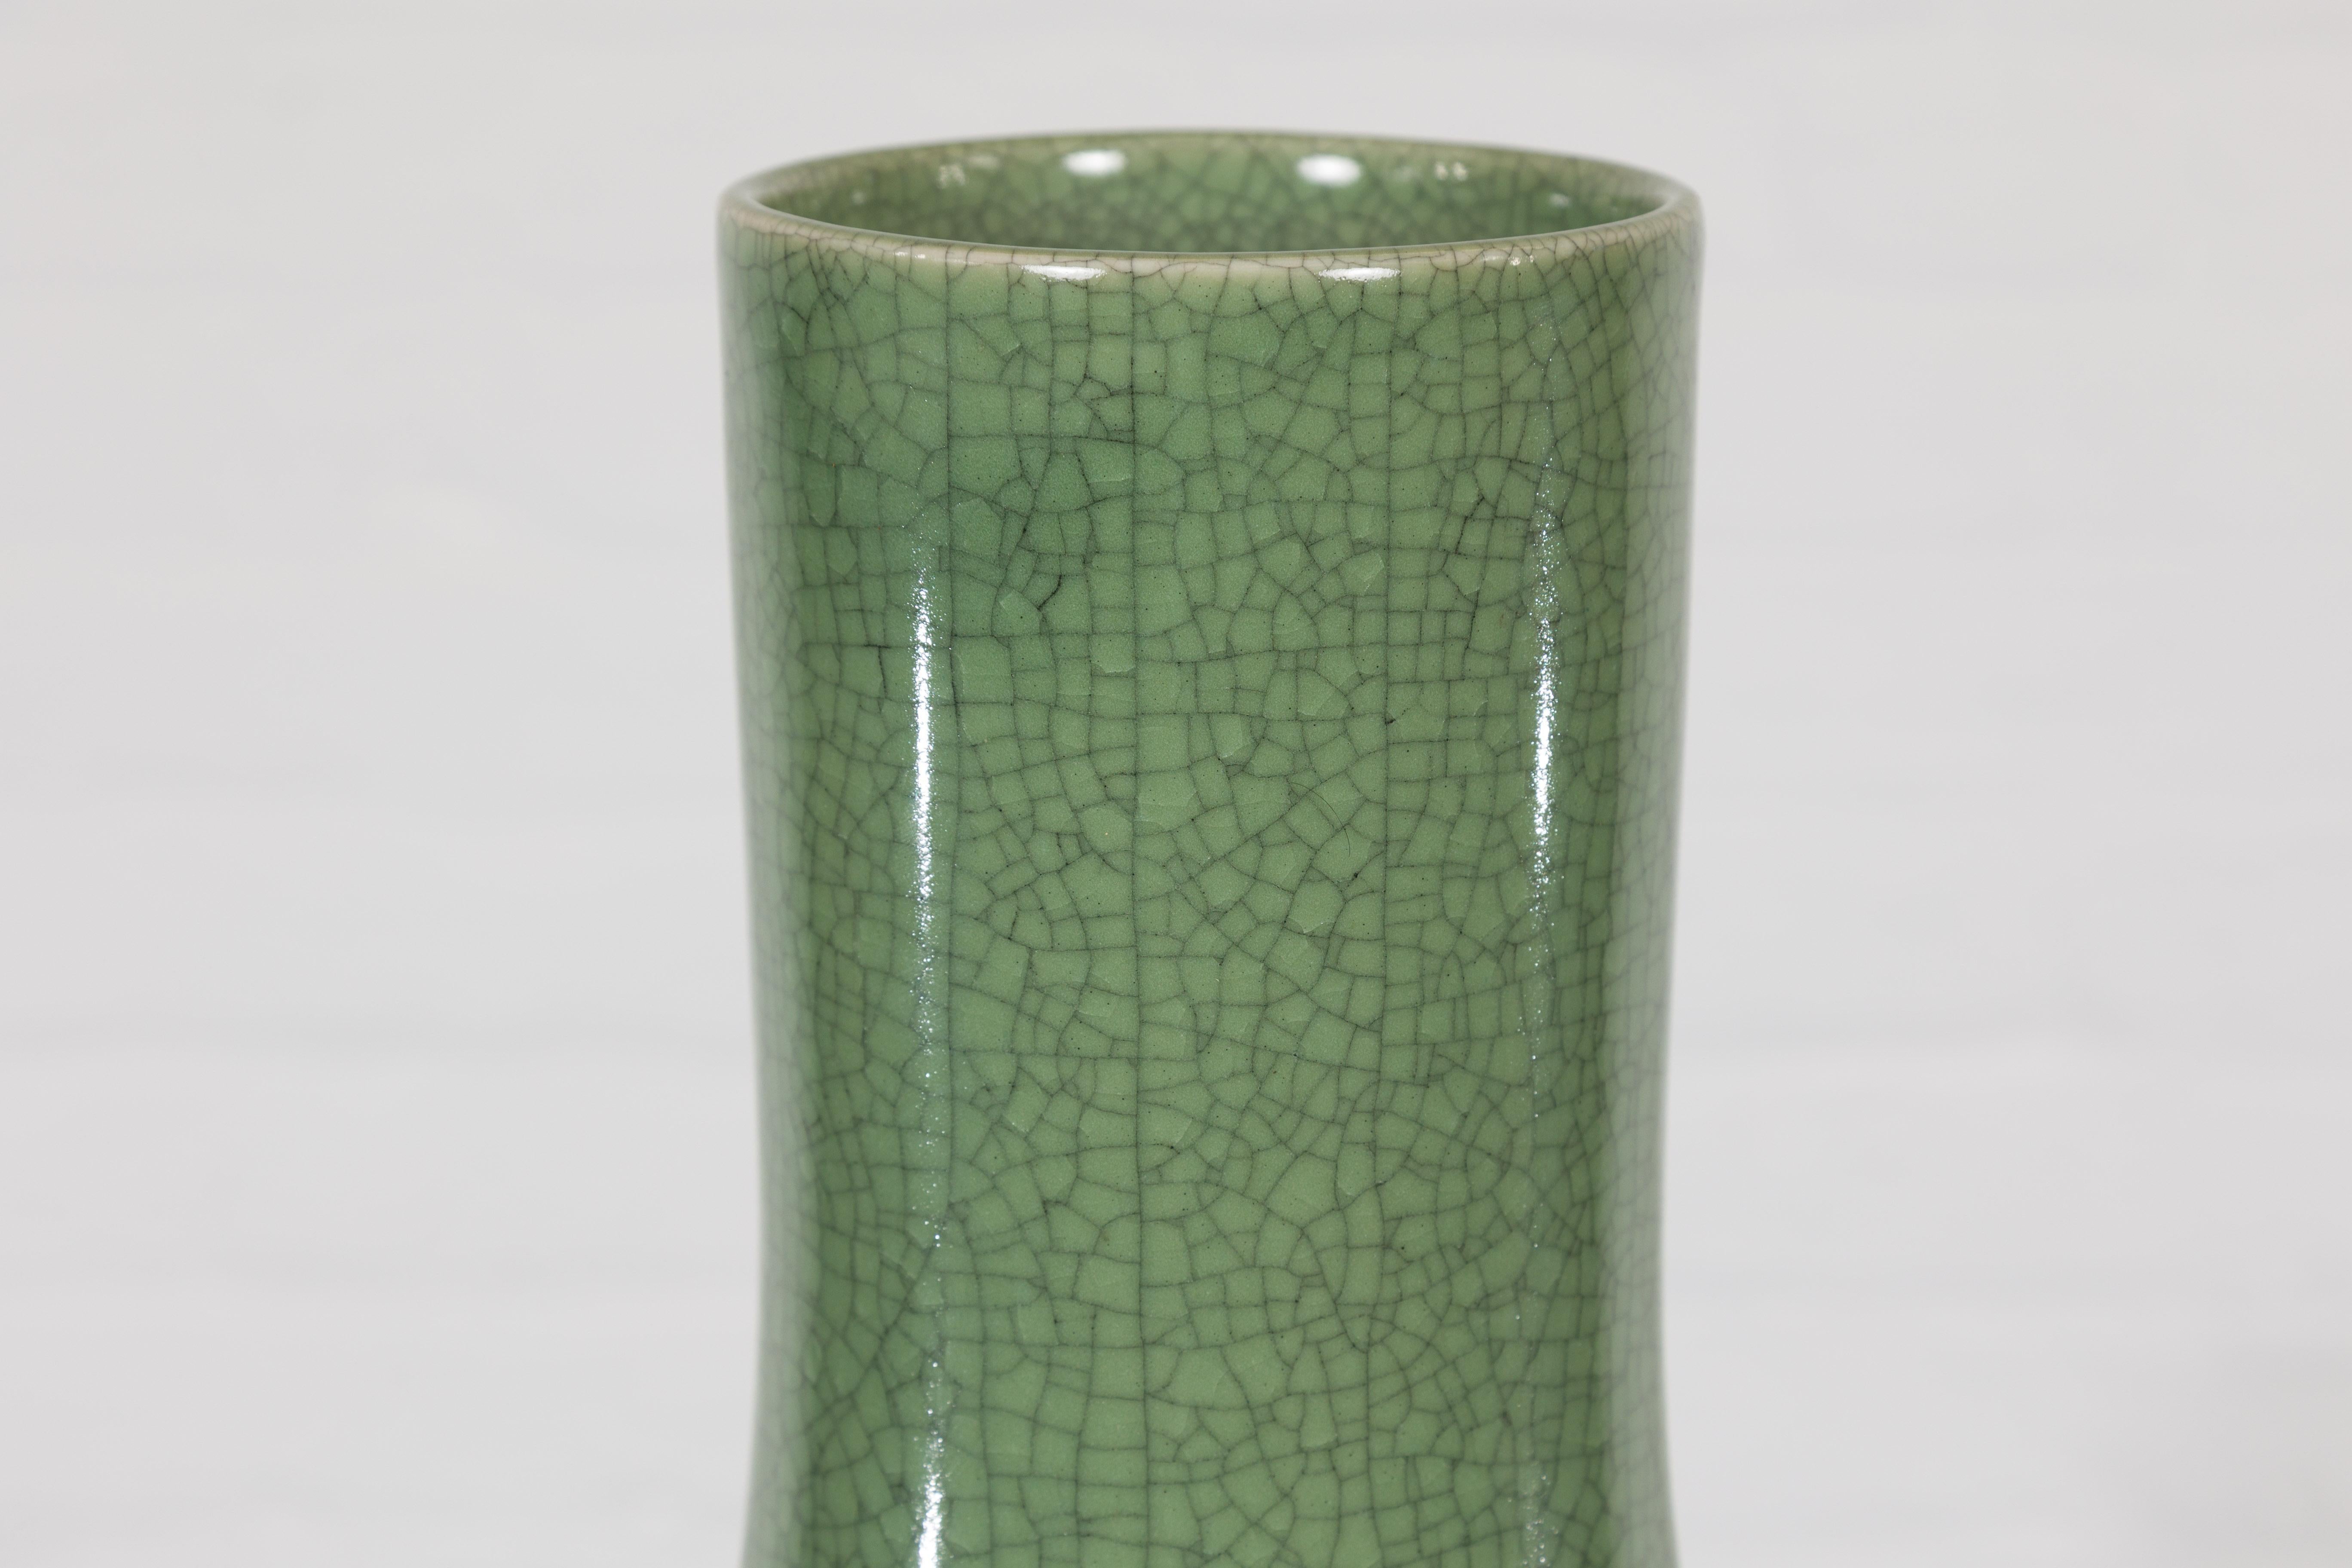 20th Century Chinese Vintage Ceramic Vase with Crackle Green Glaze and Narrow Neck